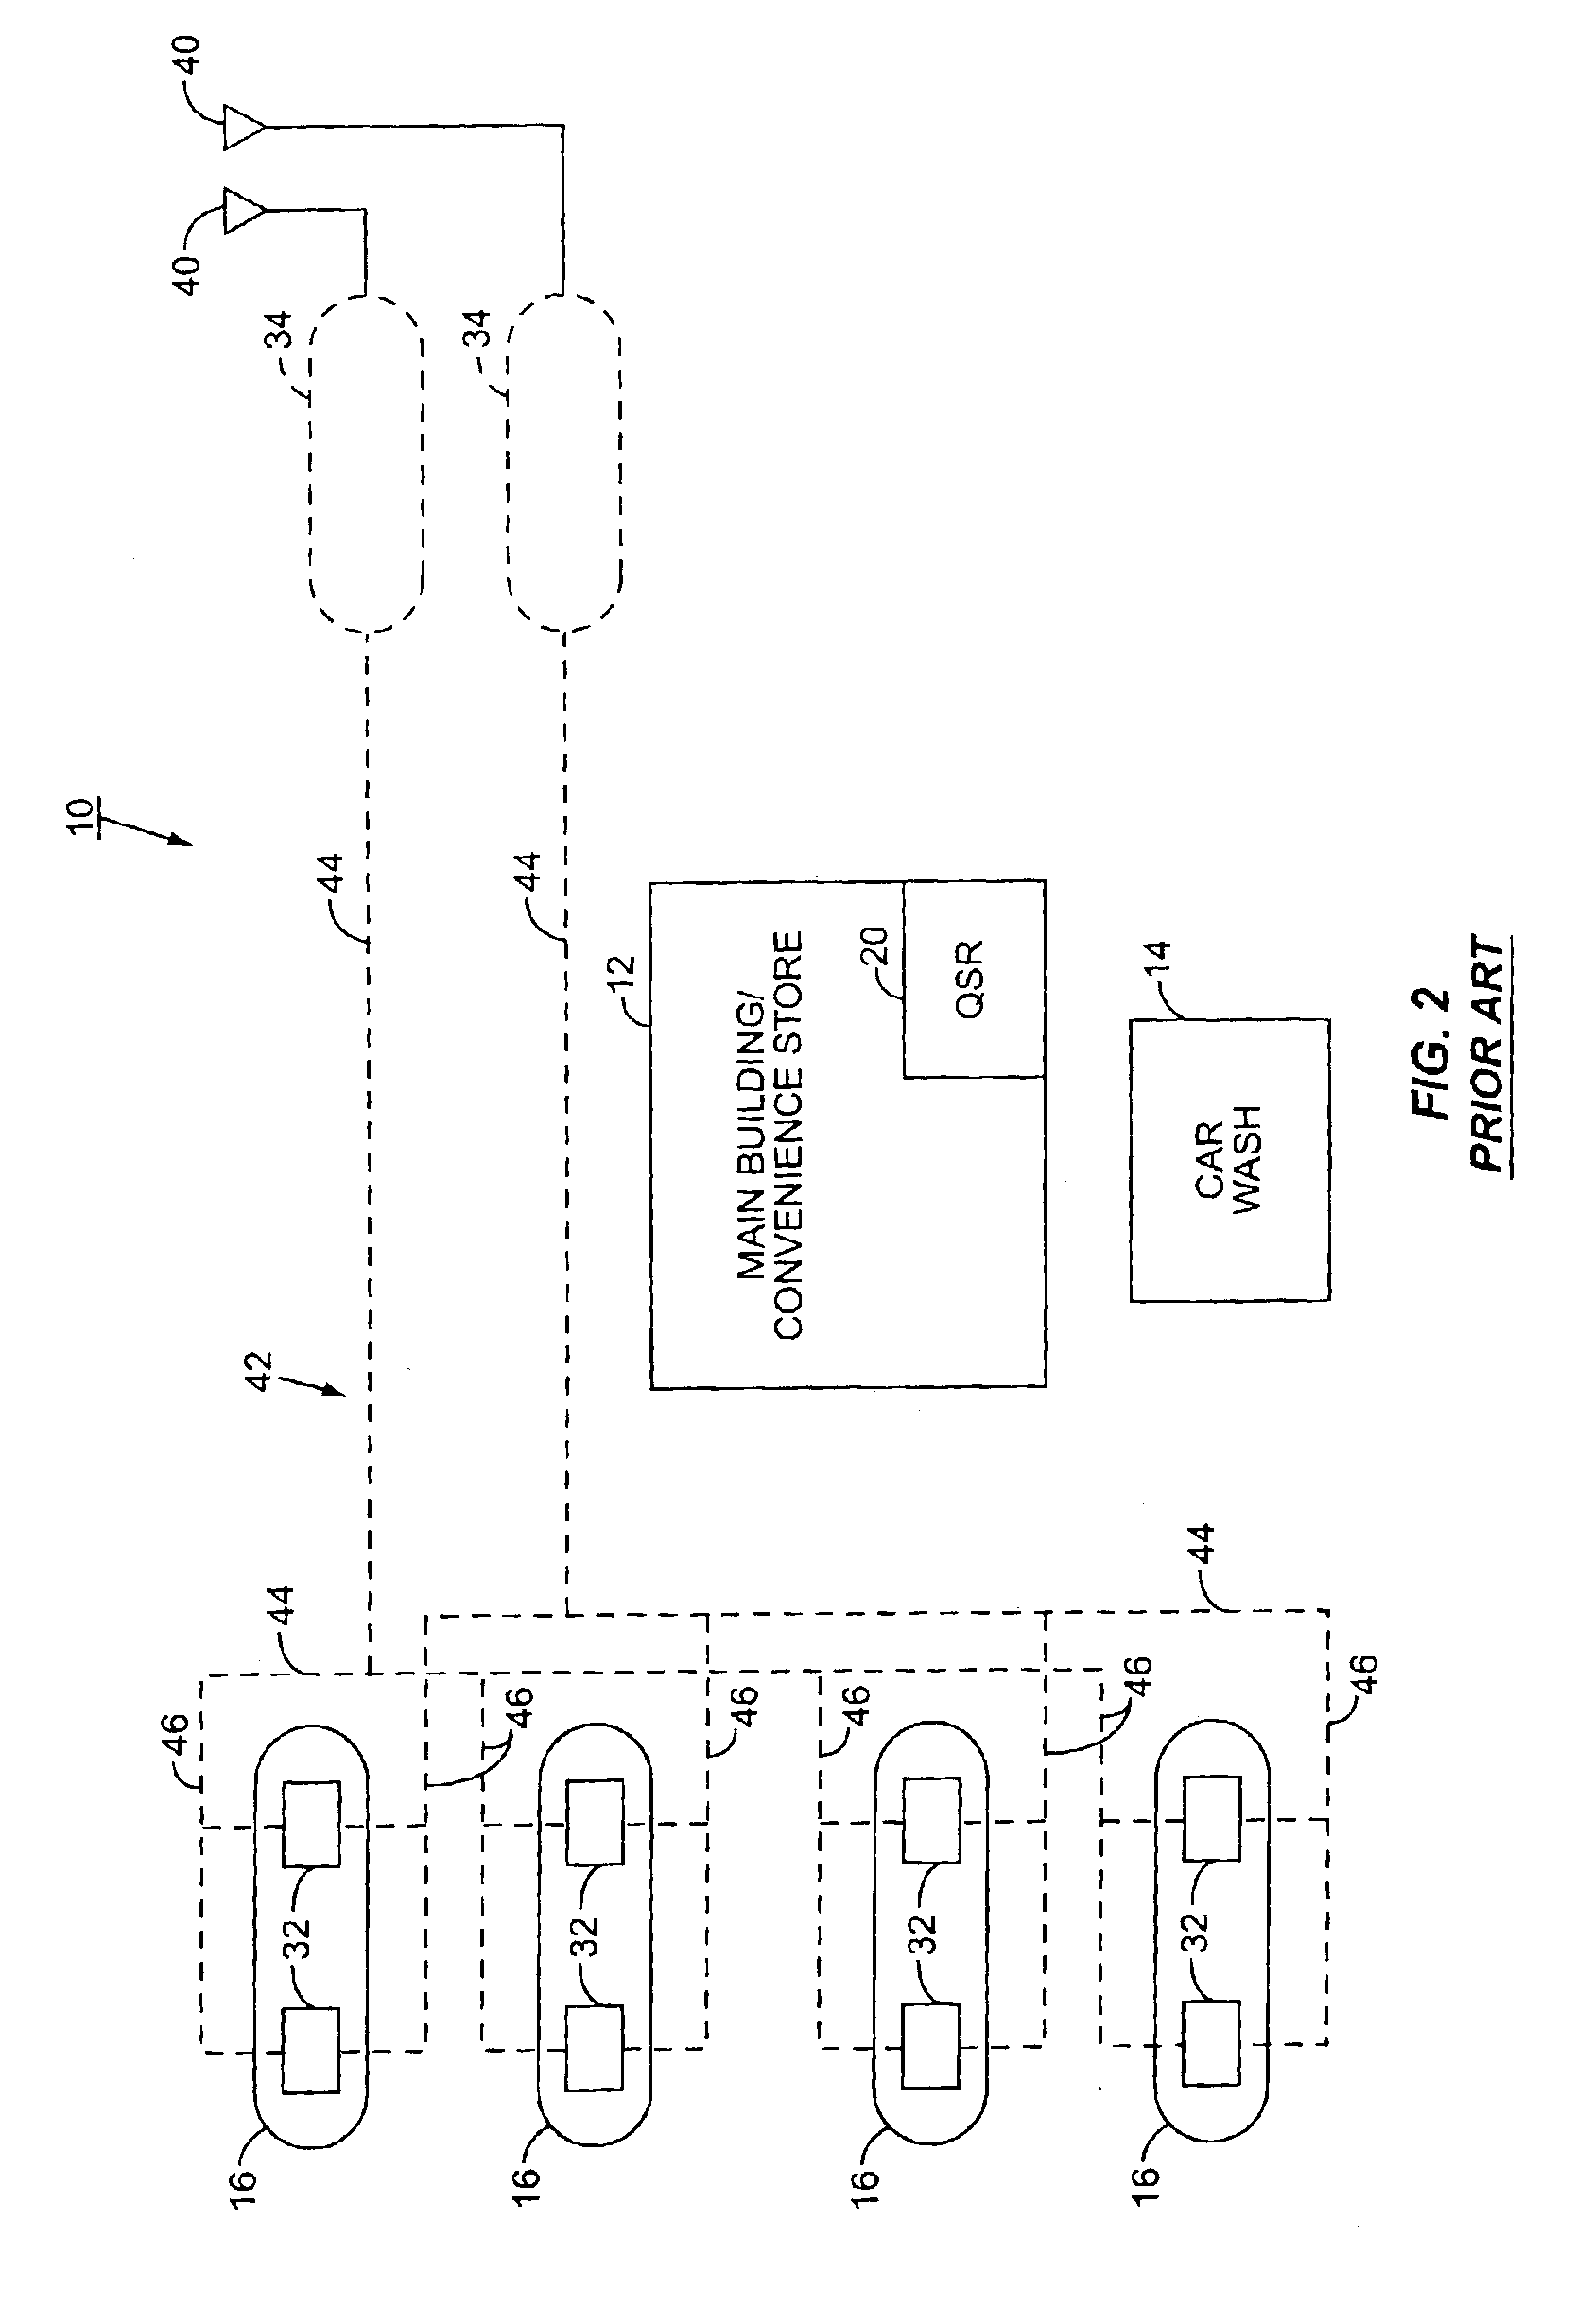 Underground storage tank metering system in a service station environment